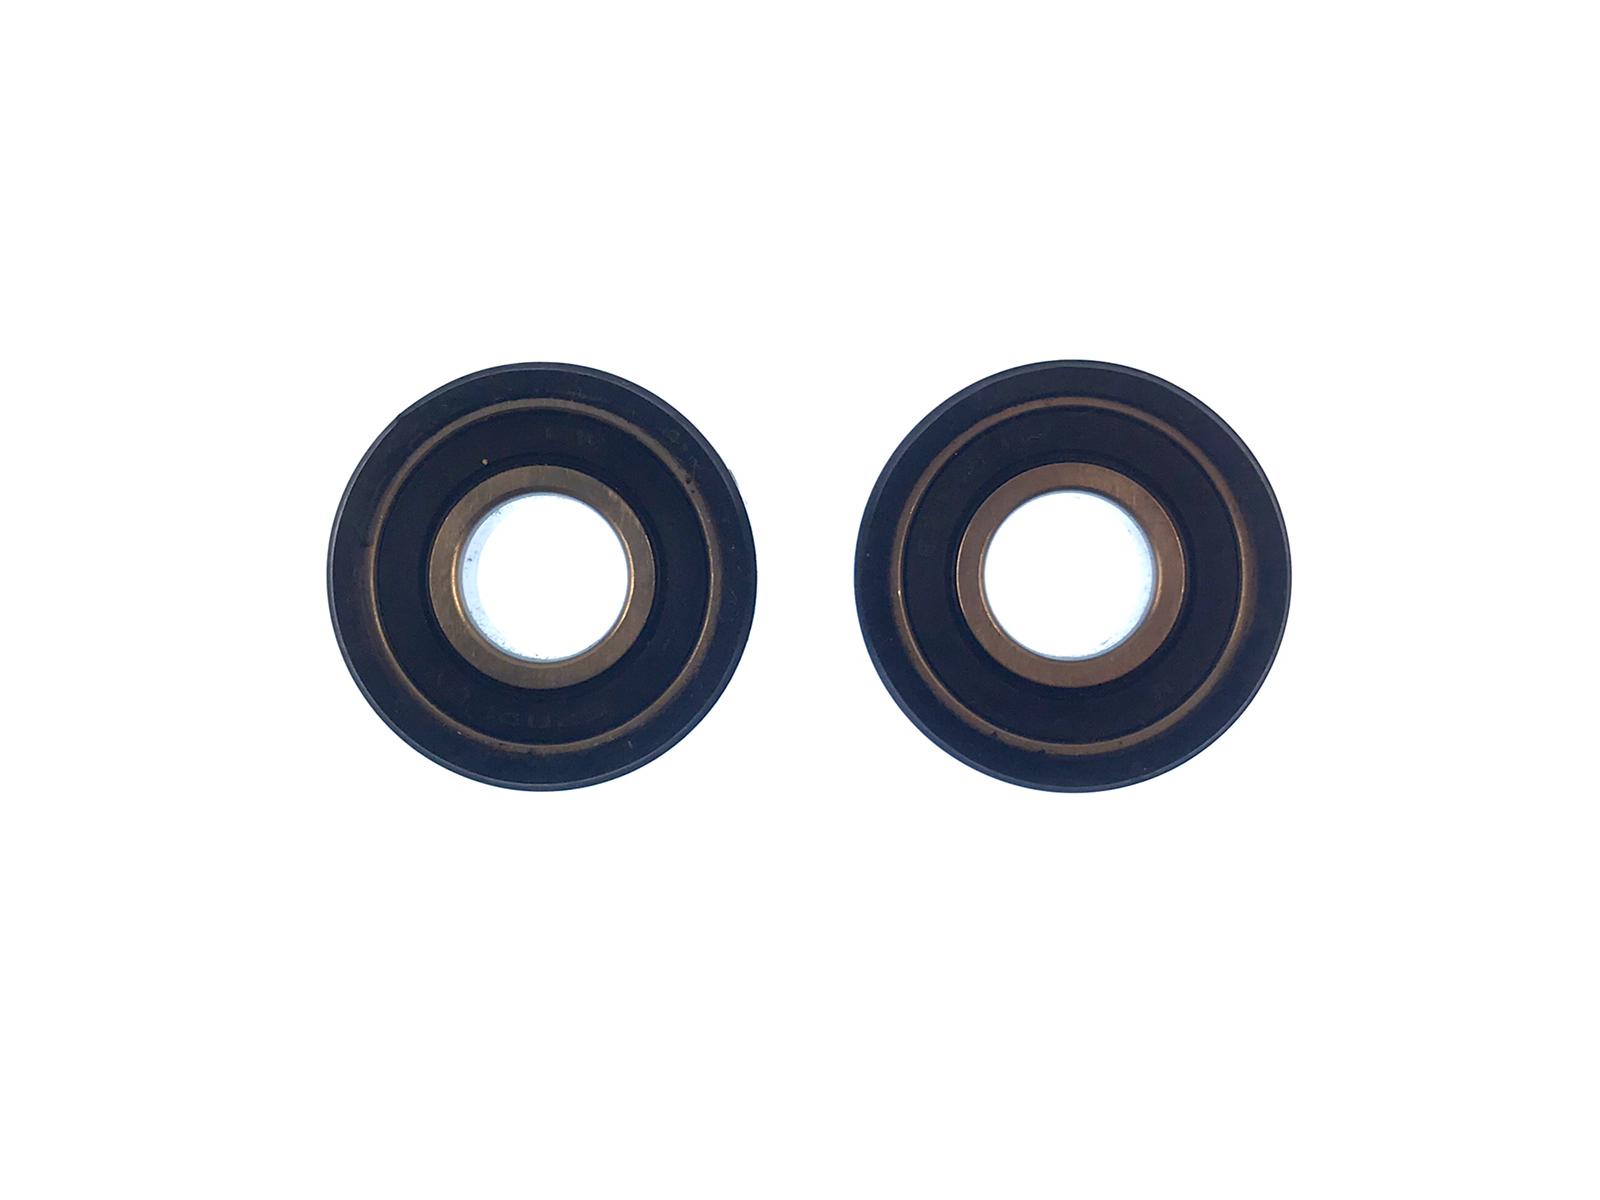 Tumble Dryer Bearing Wheel For Hoover DX H9A2TCEX-S Dryer 6202LUV